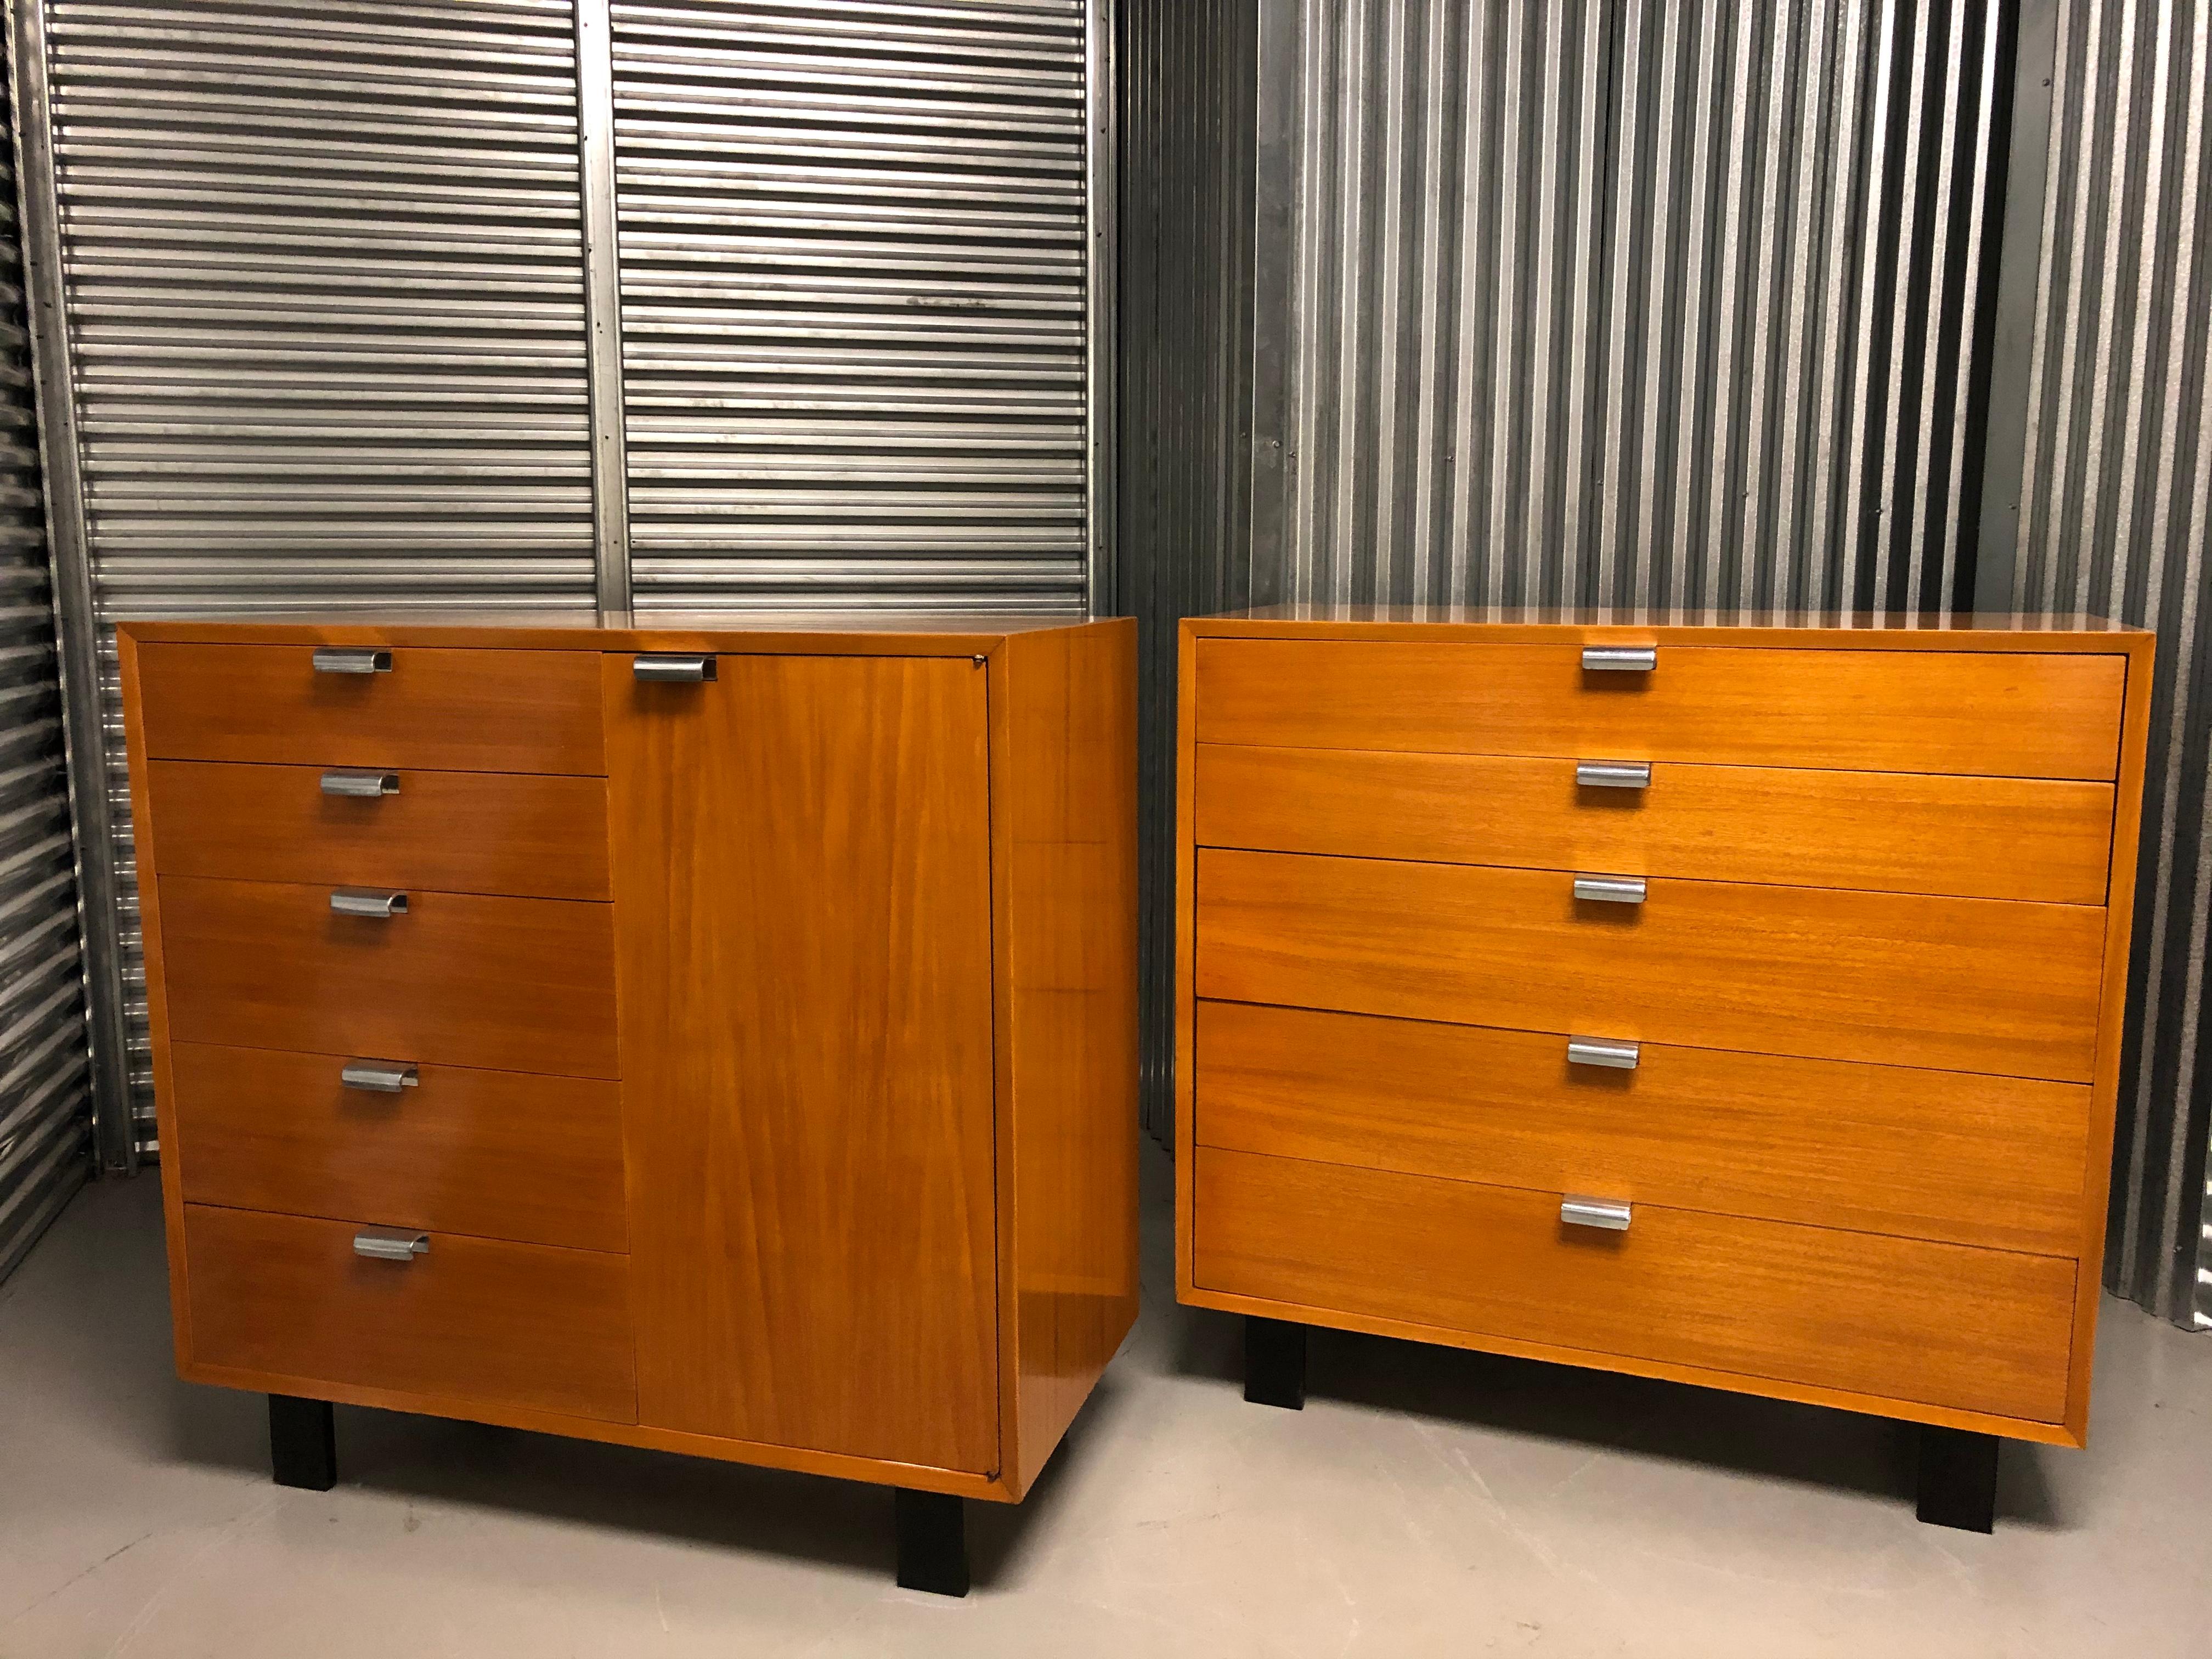 Pair of George Nelson for Herman Miller bureau cabinet storage units, polished handles light colored birch with and black feet.